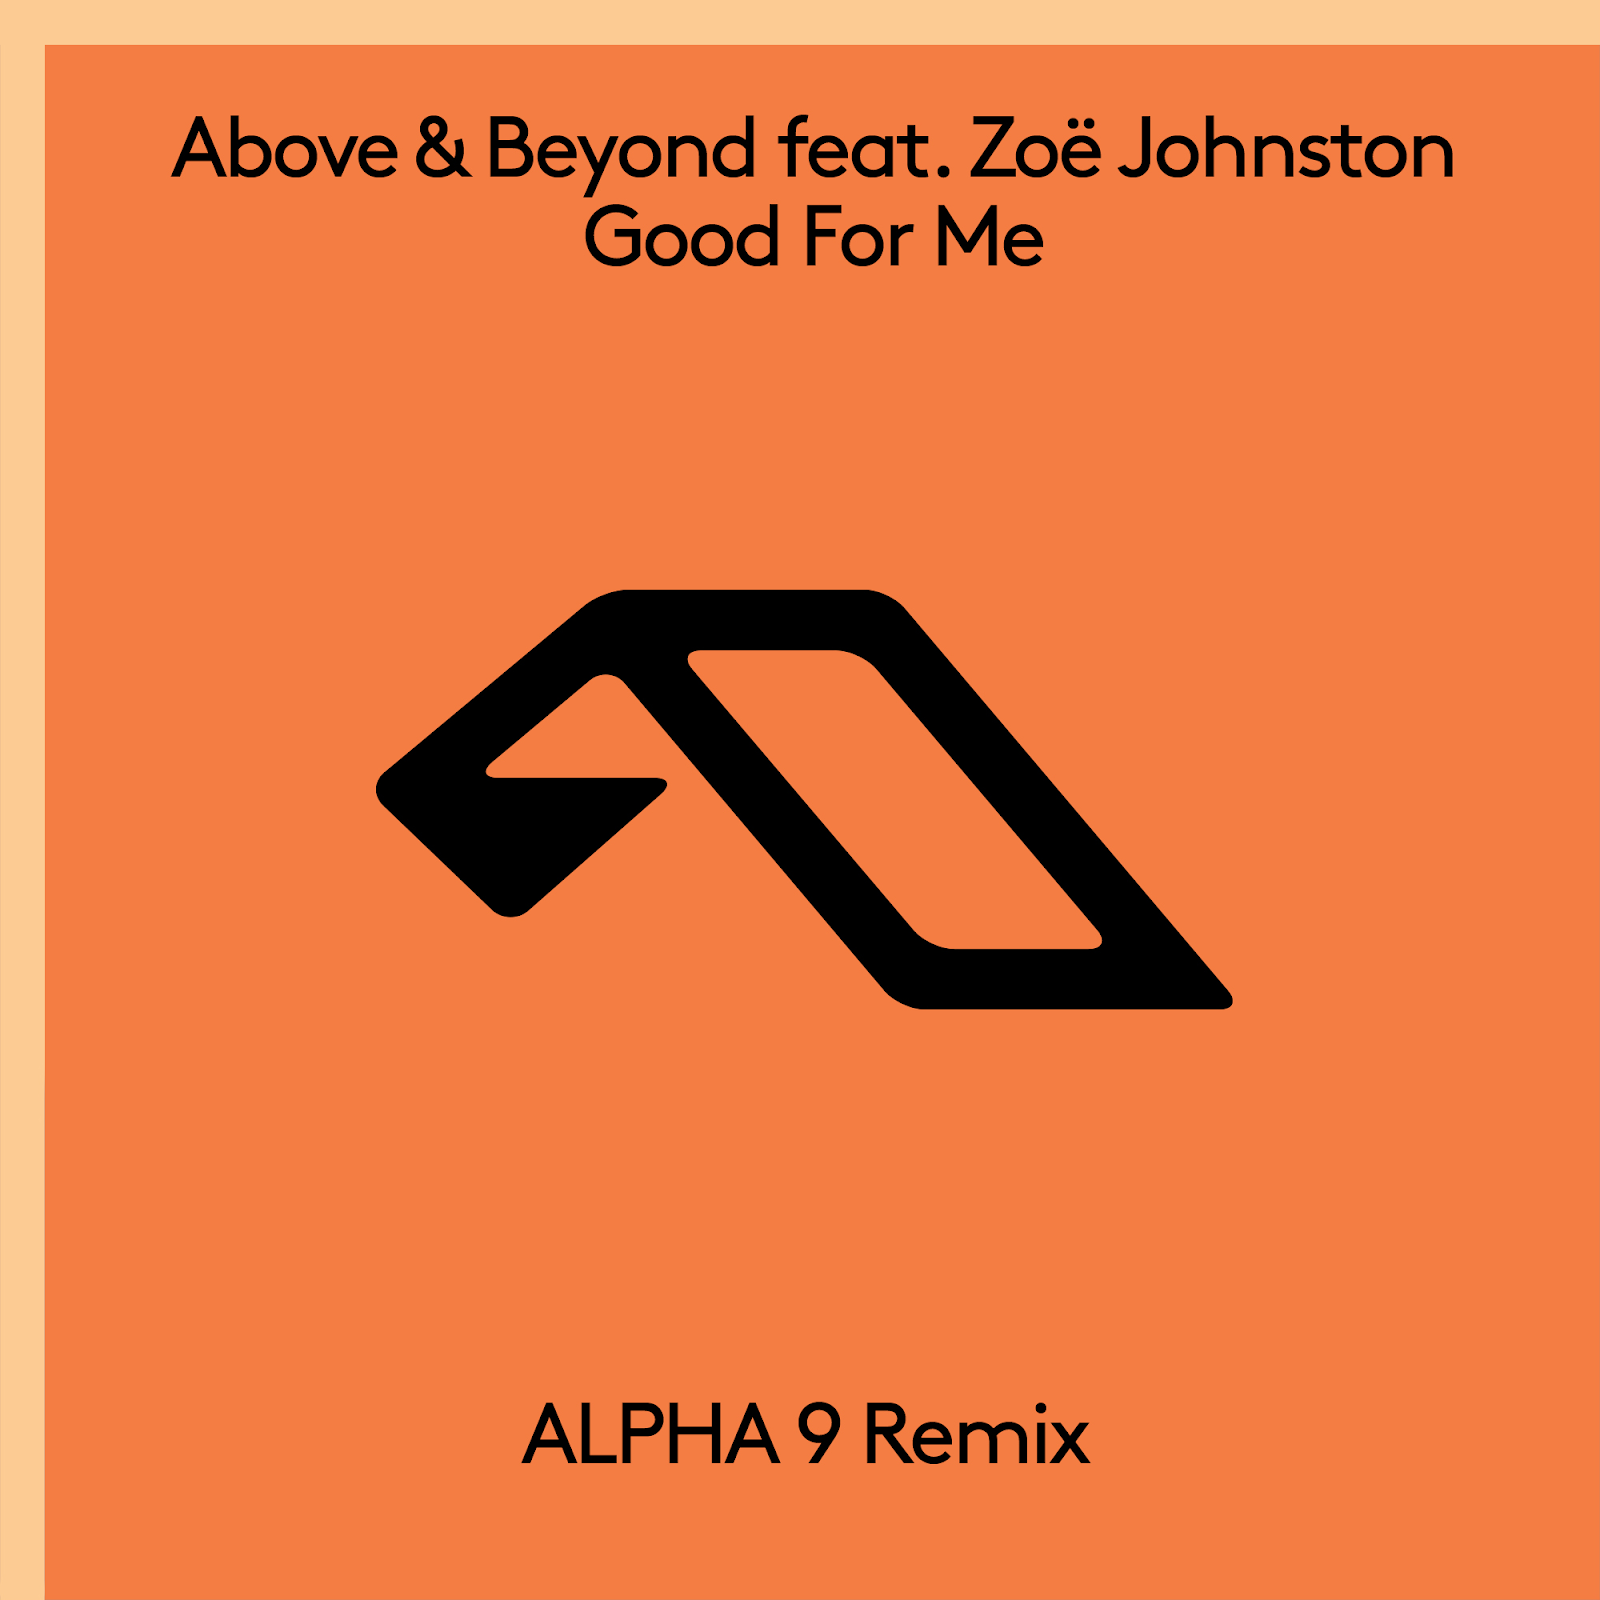 Above and Beyond feat. Zoë Johnston presents Good For Me (ALPHA 9 Remix) on Anjunabeats